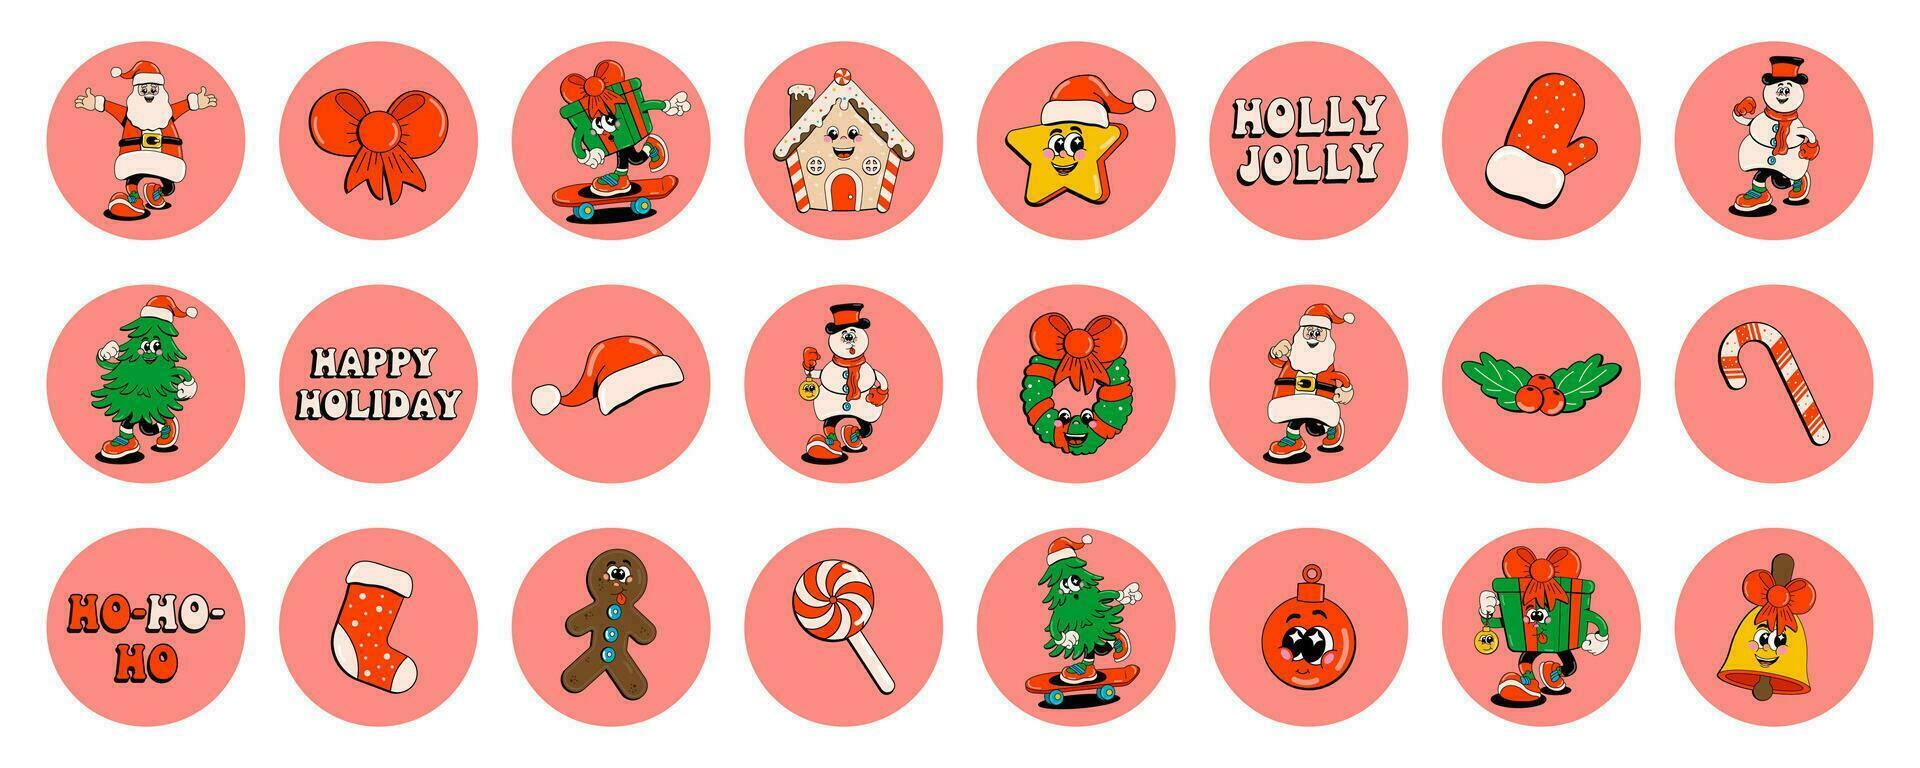 Set of stickers in retro cartoon style Merry Christmas and Happy New Year. Modern vector illustration in 70-80s style. Santa Claus, gingerbread cookies, ho-ho, mittens, house, tree, decorations.